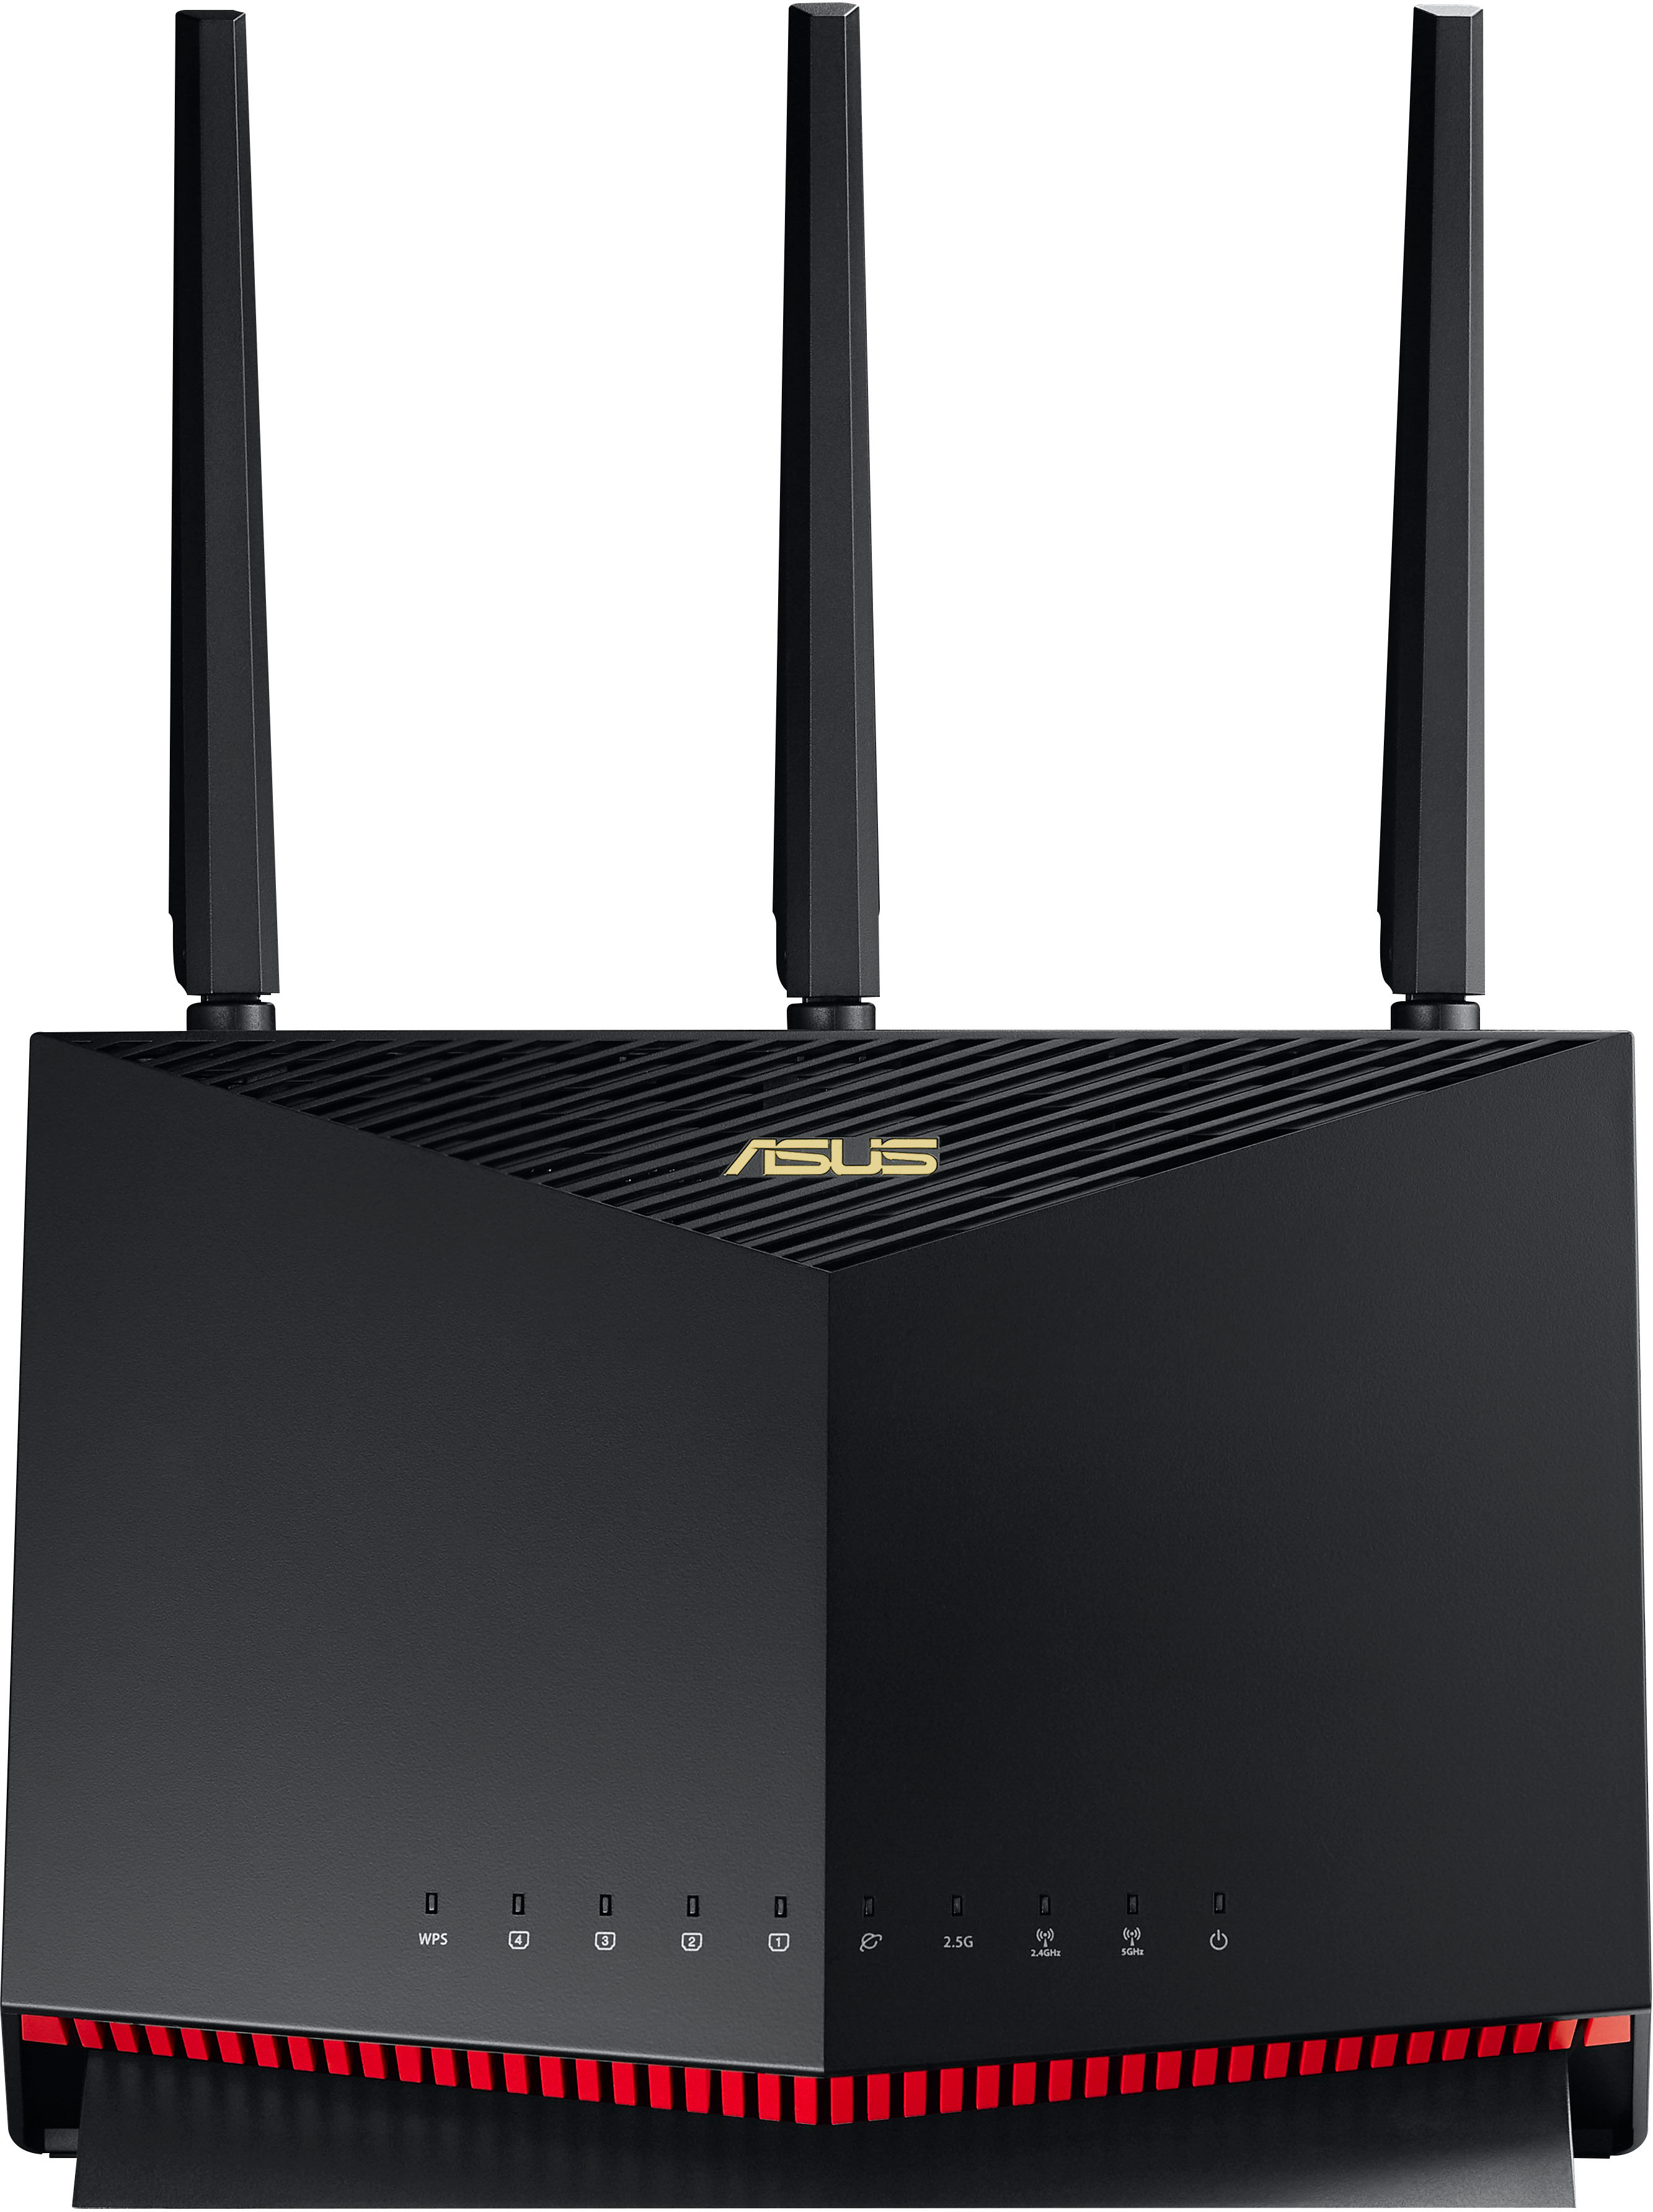 ASUS Shows Off its First Gaming Grade WiFi 7 Routers